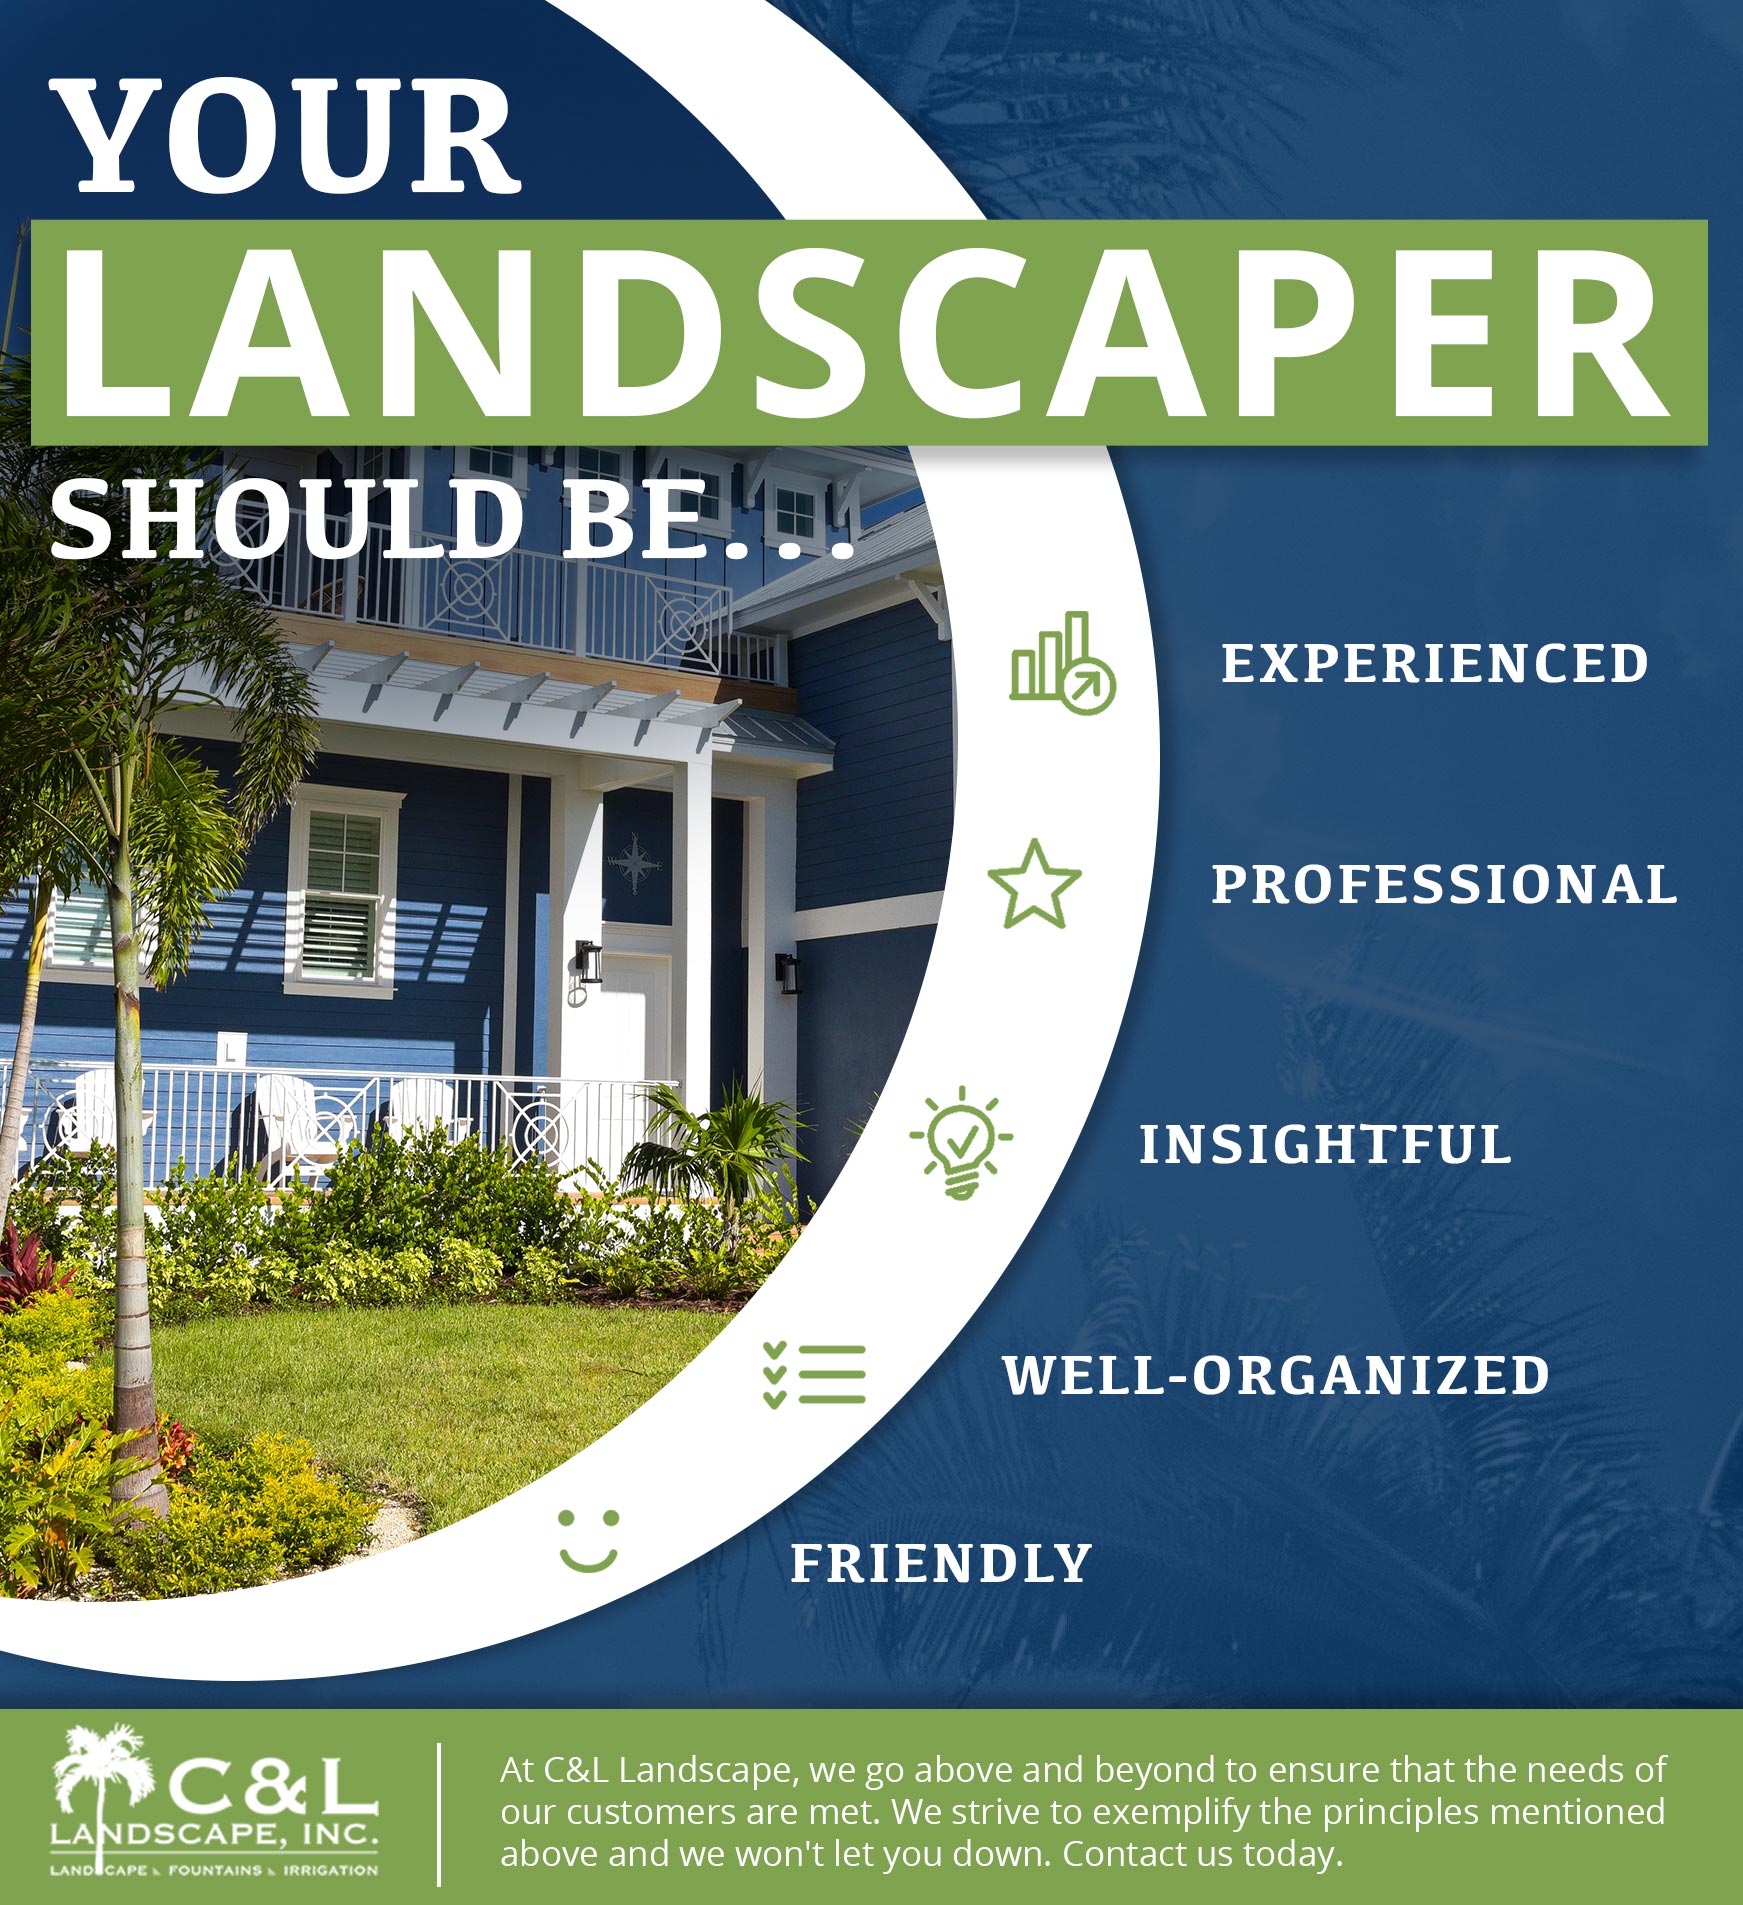 Your-Landscaper-Should-Be-Infographic-5f91b516ab2a5